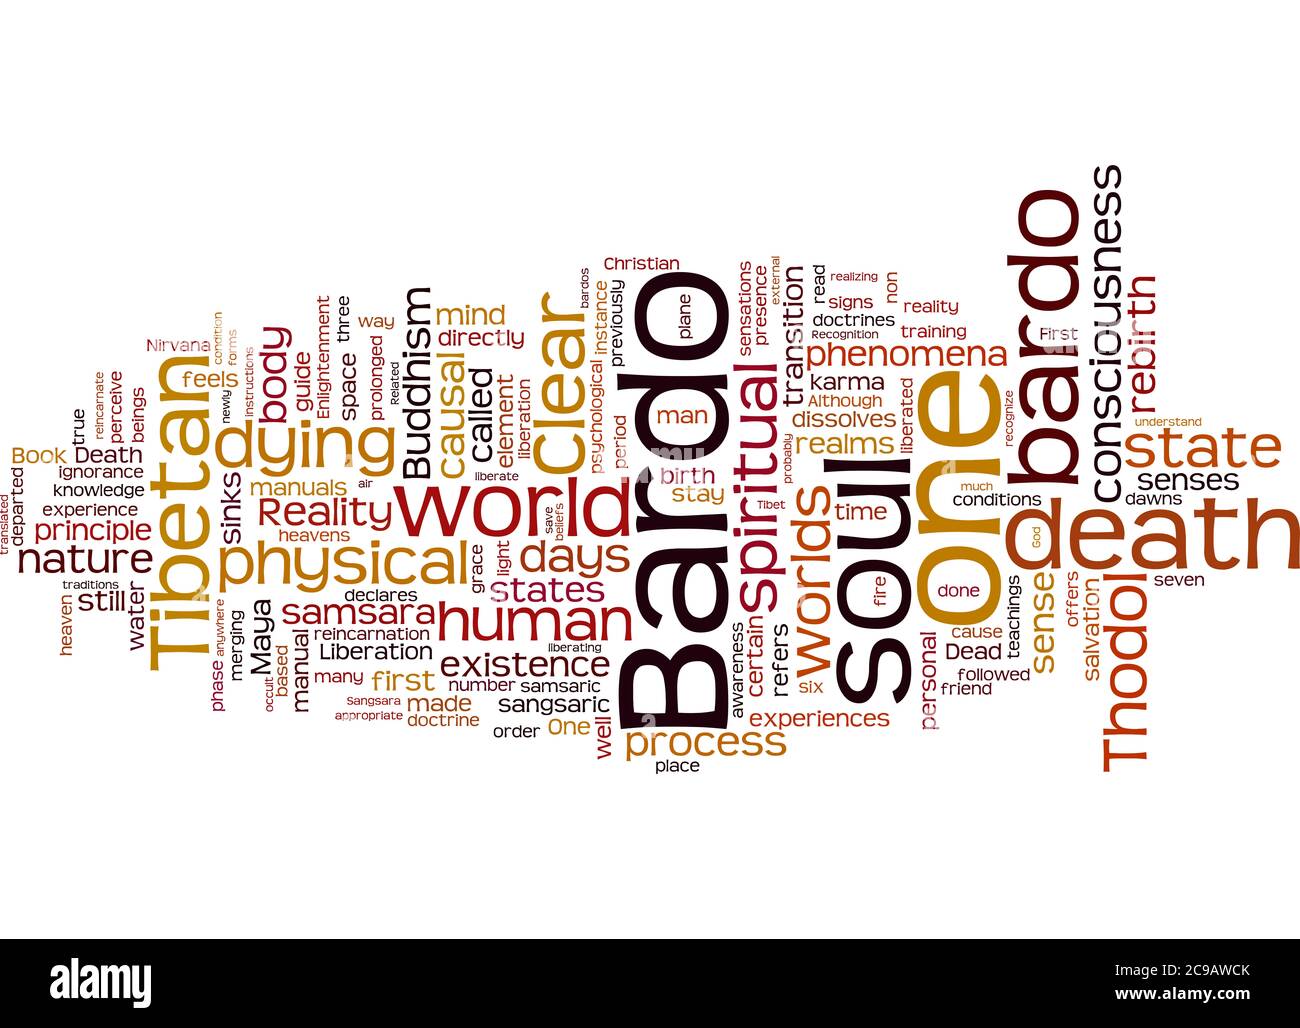 Word Cloud Summary Of The Metaphysical View Of Death And Life After Death Part 6 Article Stock Photo Alamy